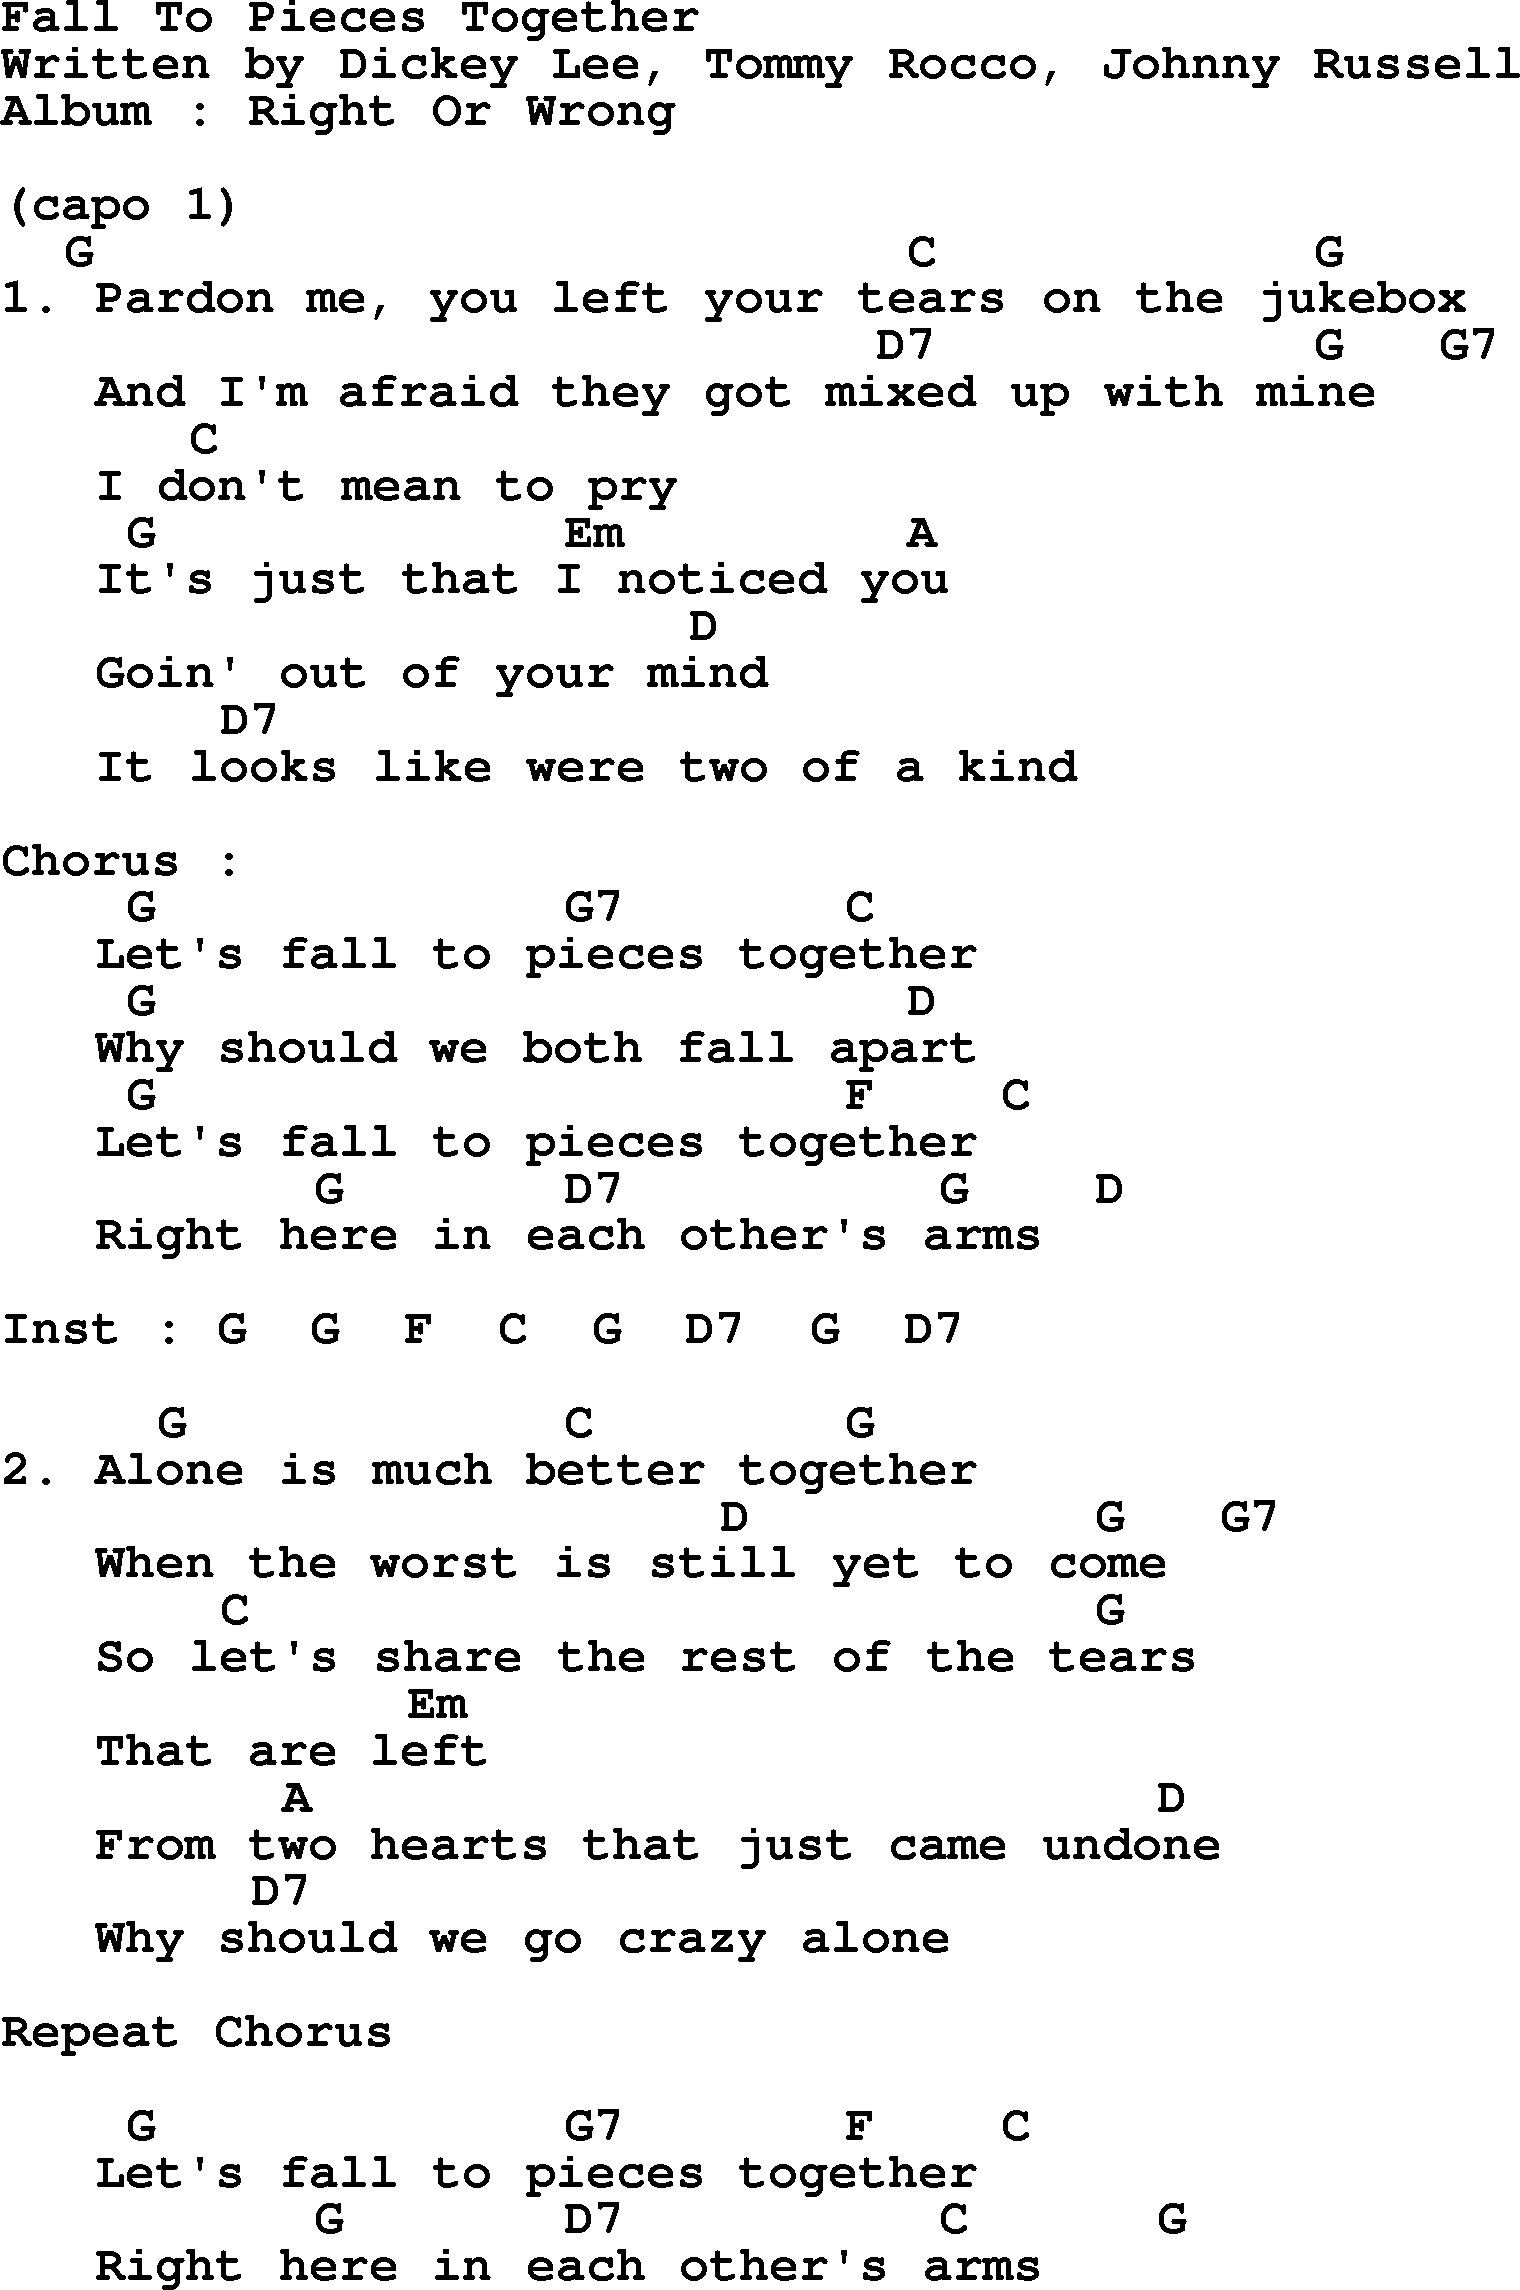 George Strait song: Fall To Pieces Together, lyrics and chords